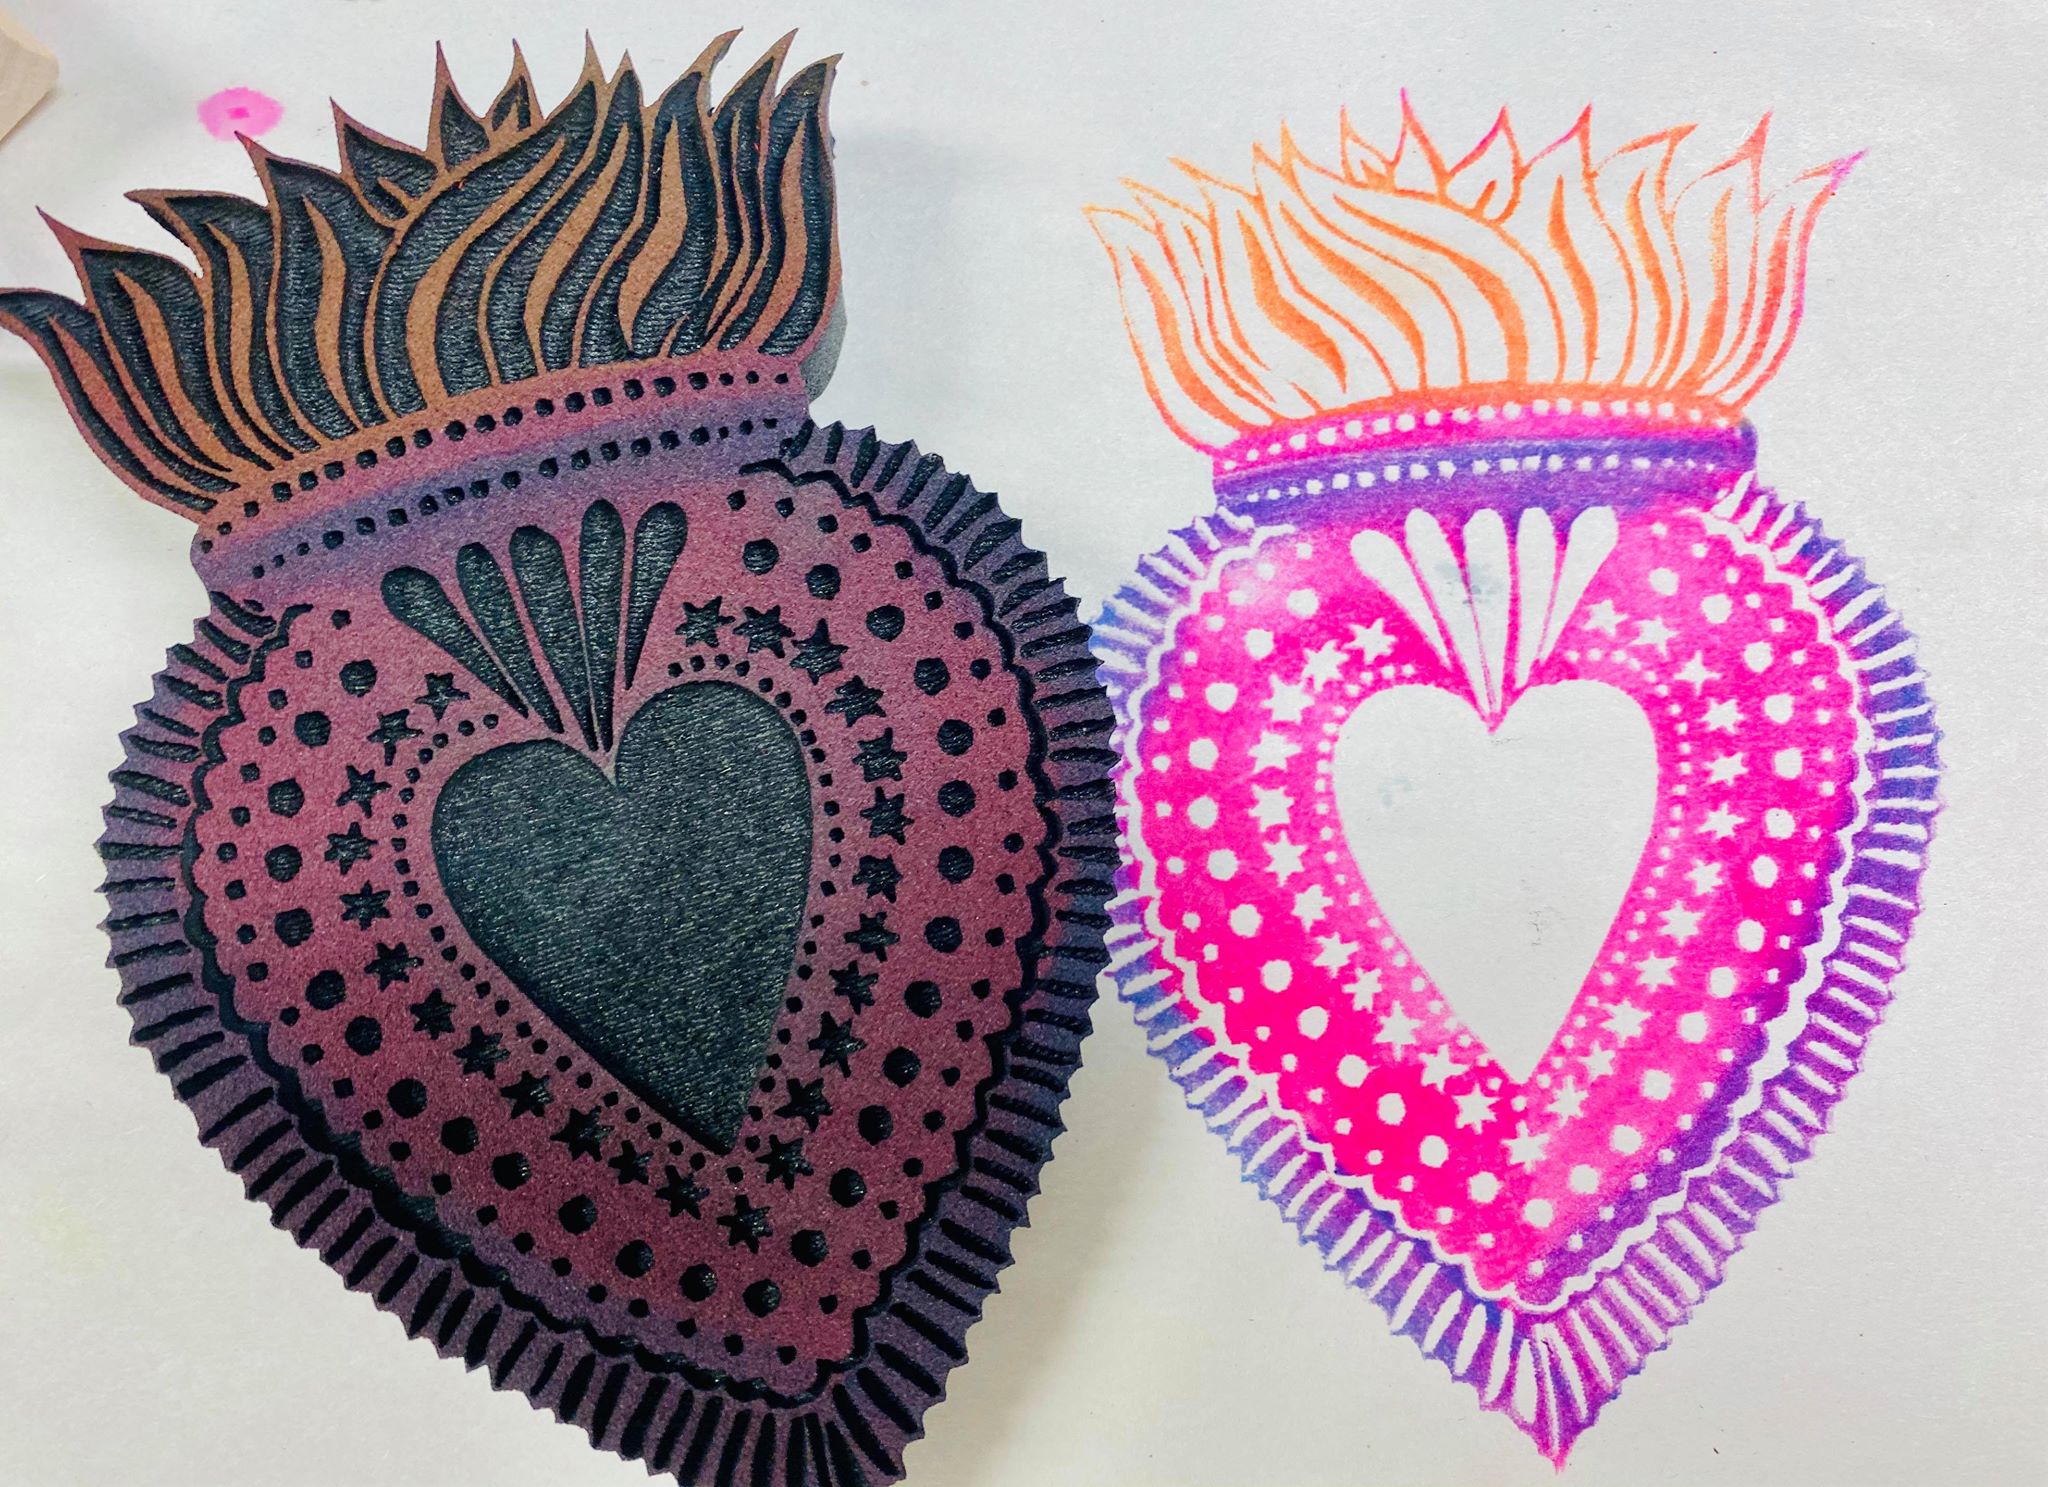 Flaming Heart Stamp